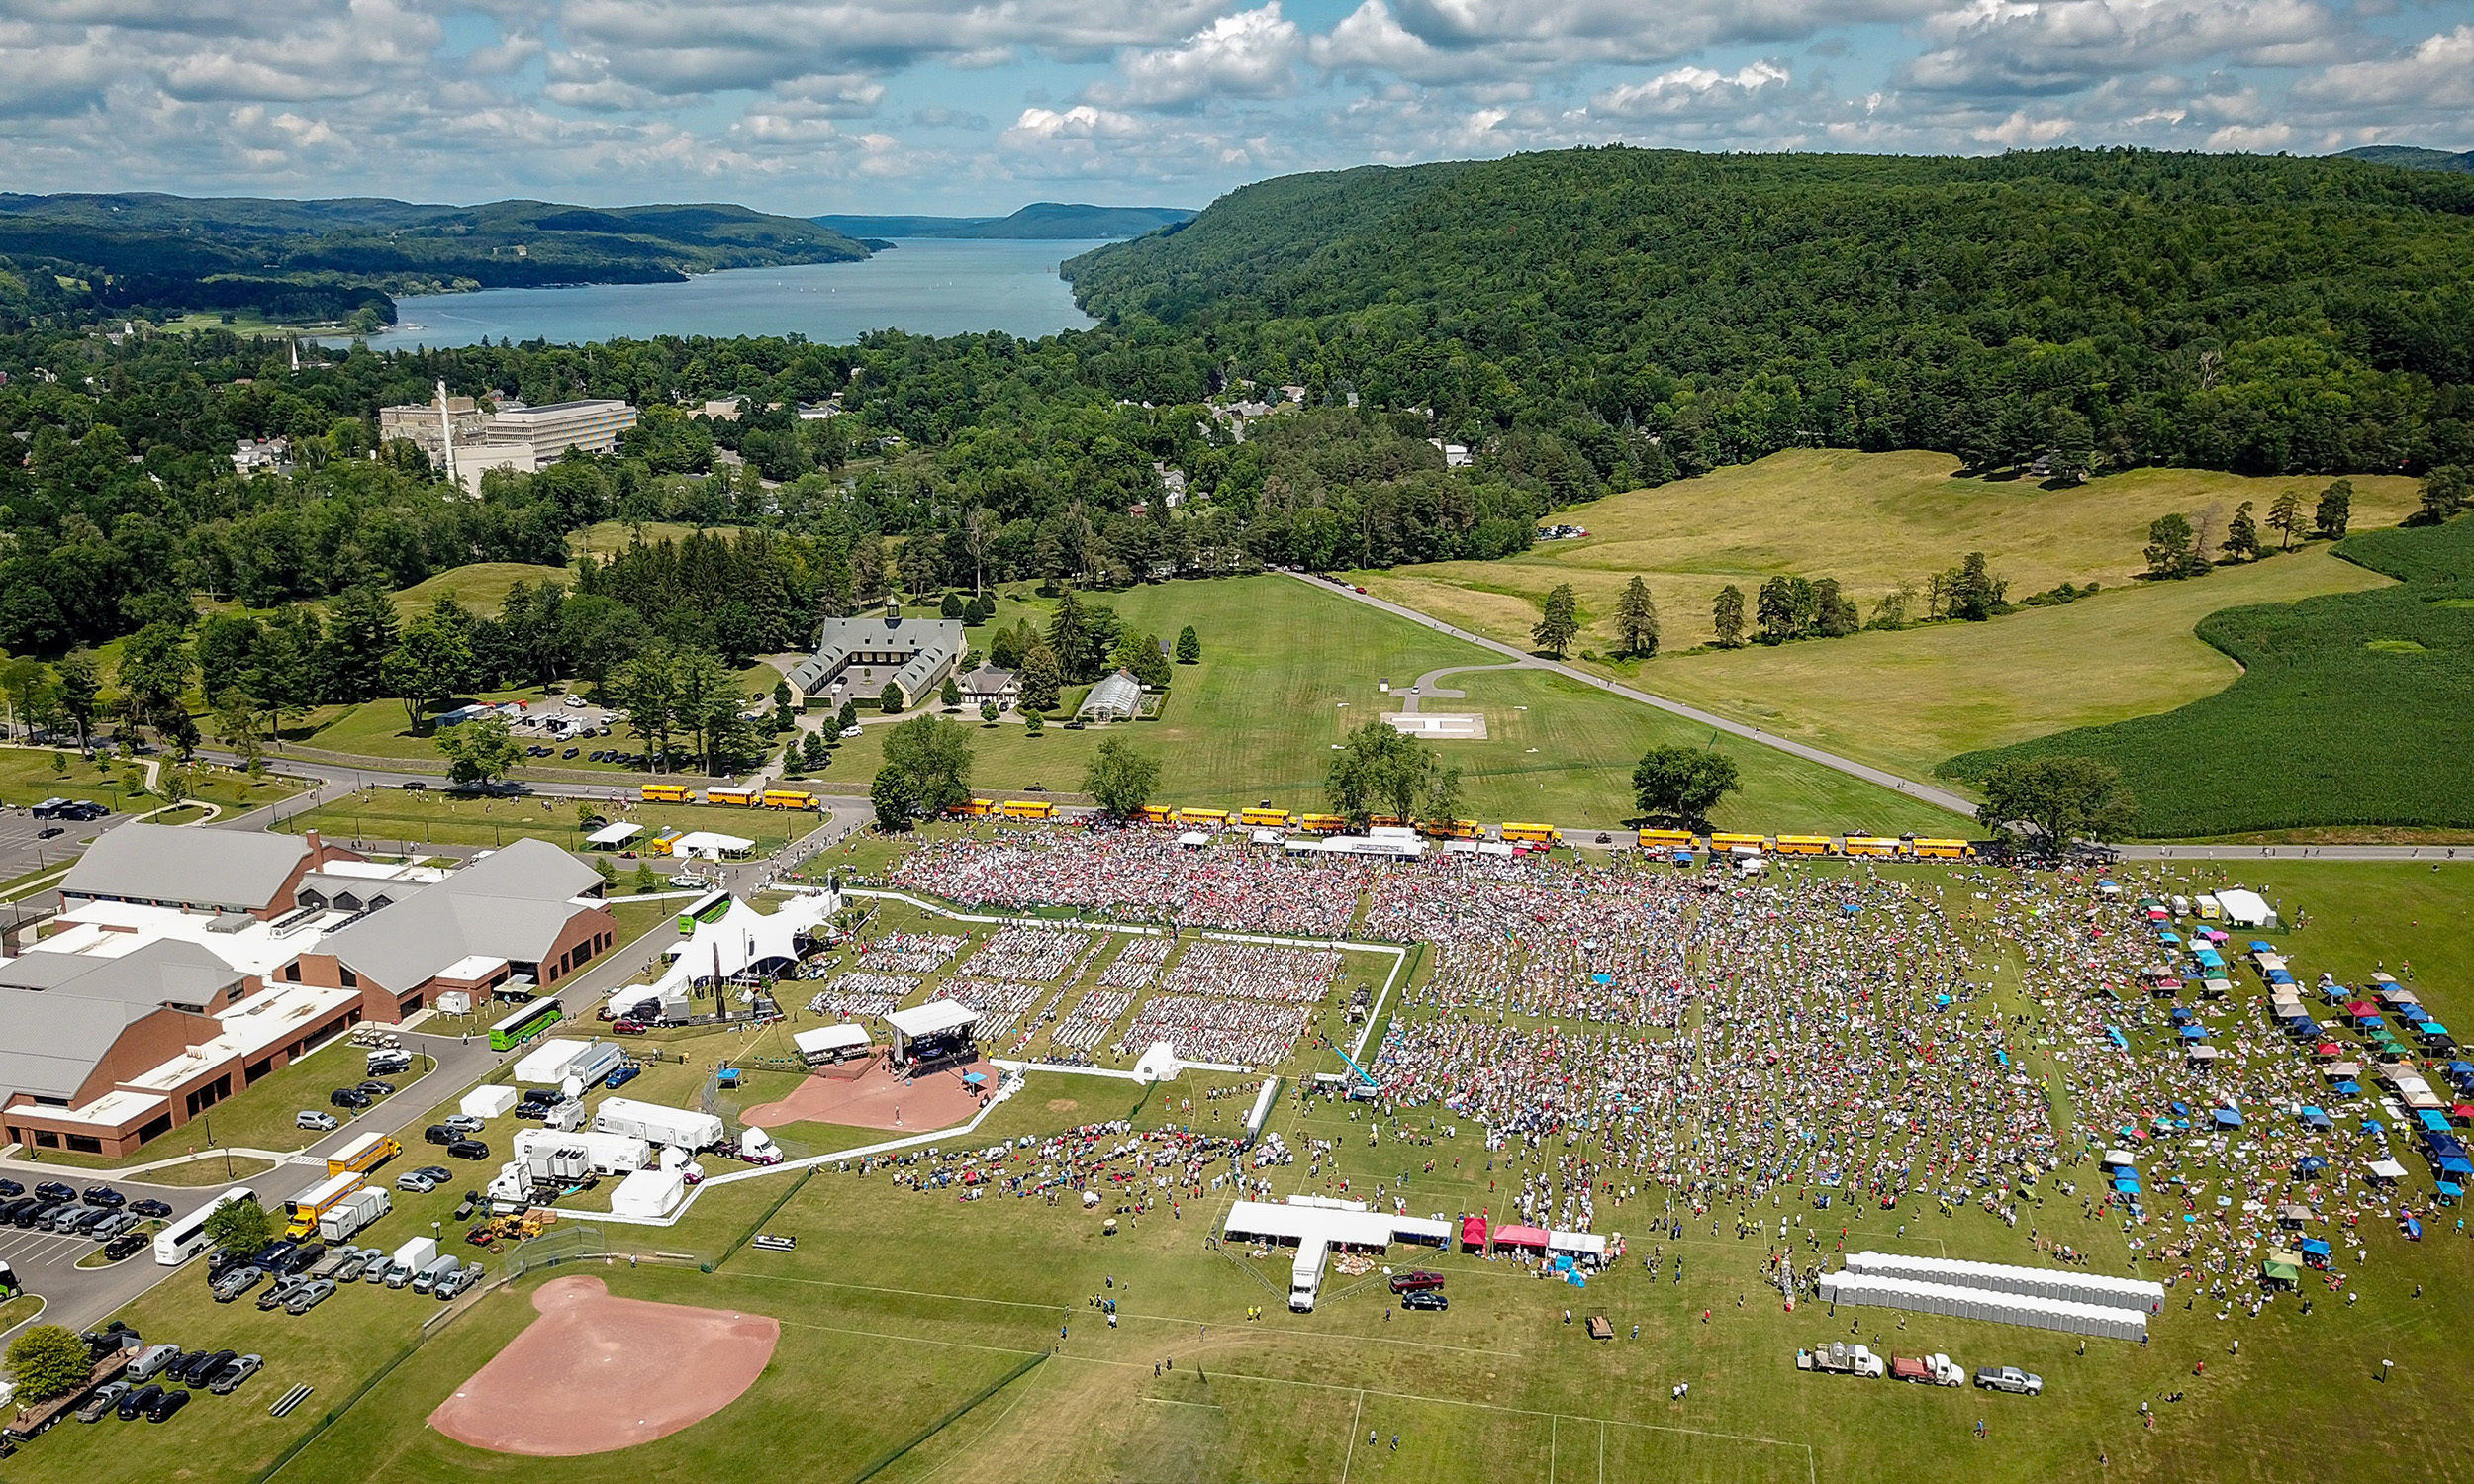 Historic Cooperstown, NY Makes For a Fun Summer Road Trip